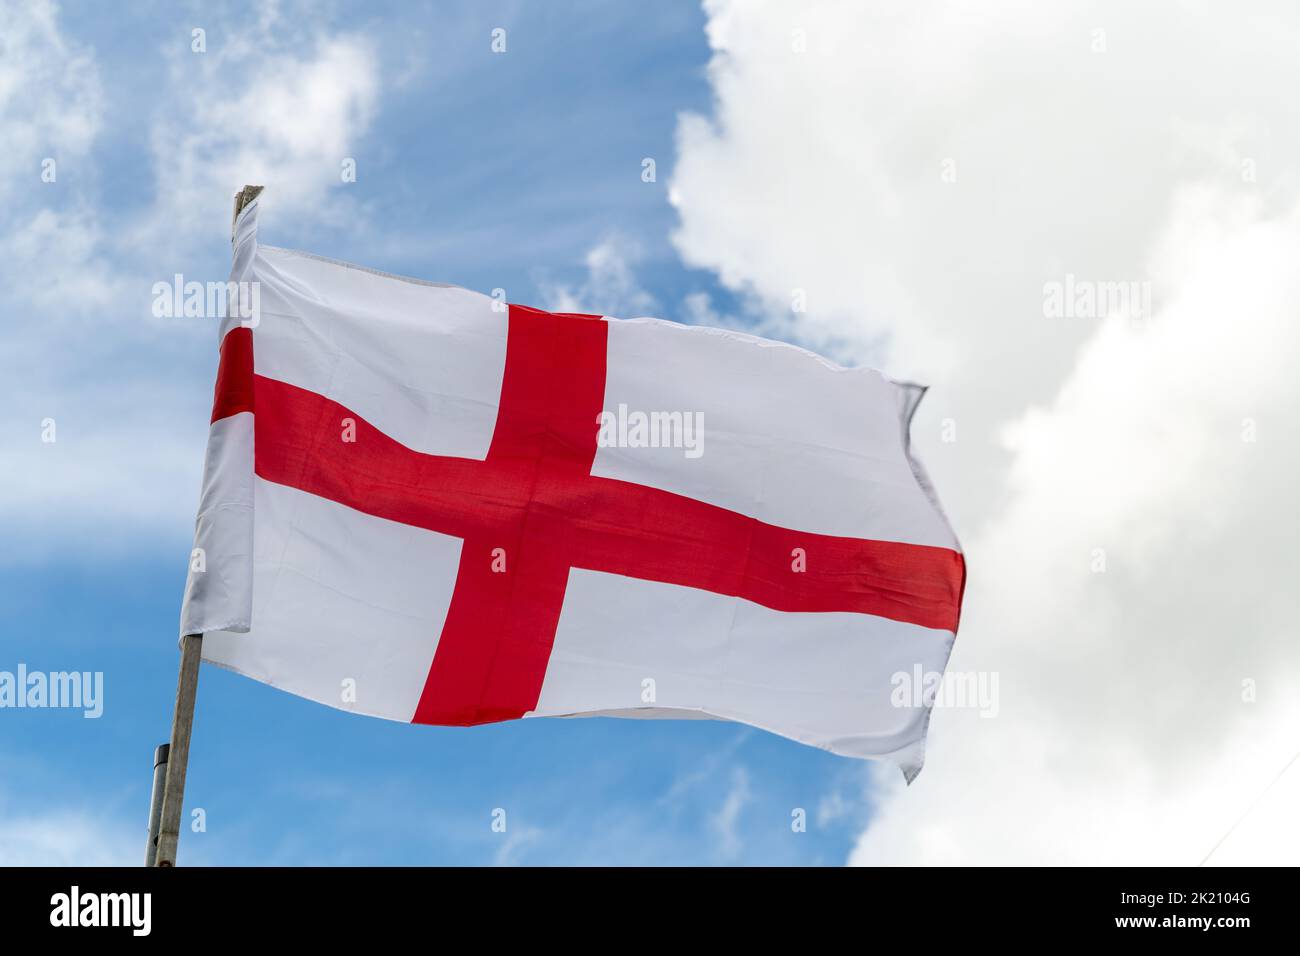 Flag of England on beautiful blue cloudy sky background. White and red flag blowing on the wind. Stock Photo